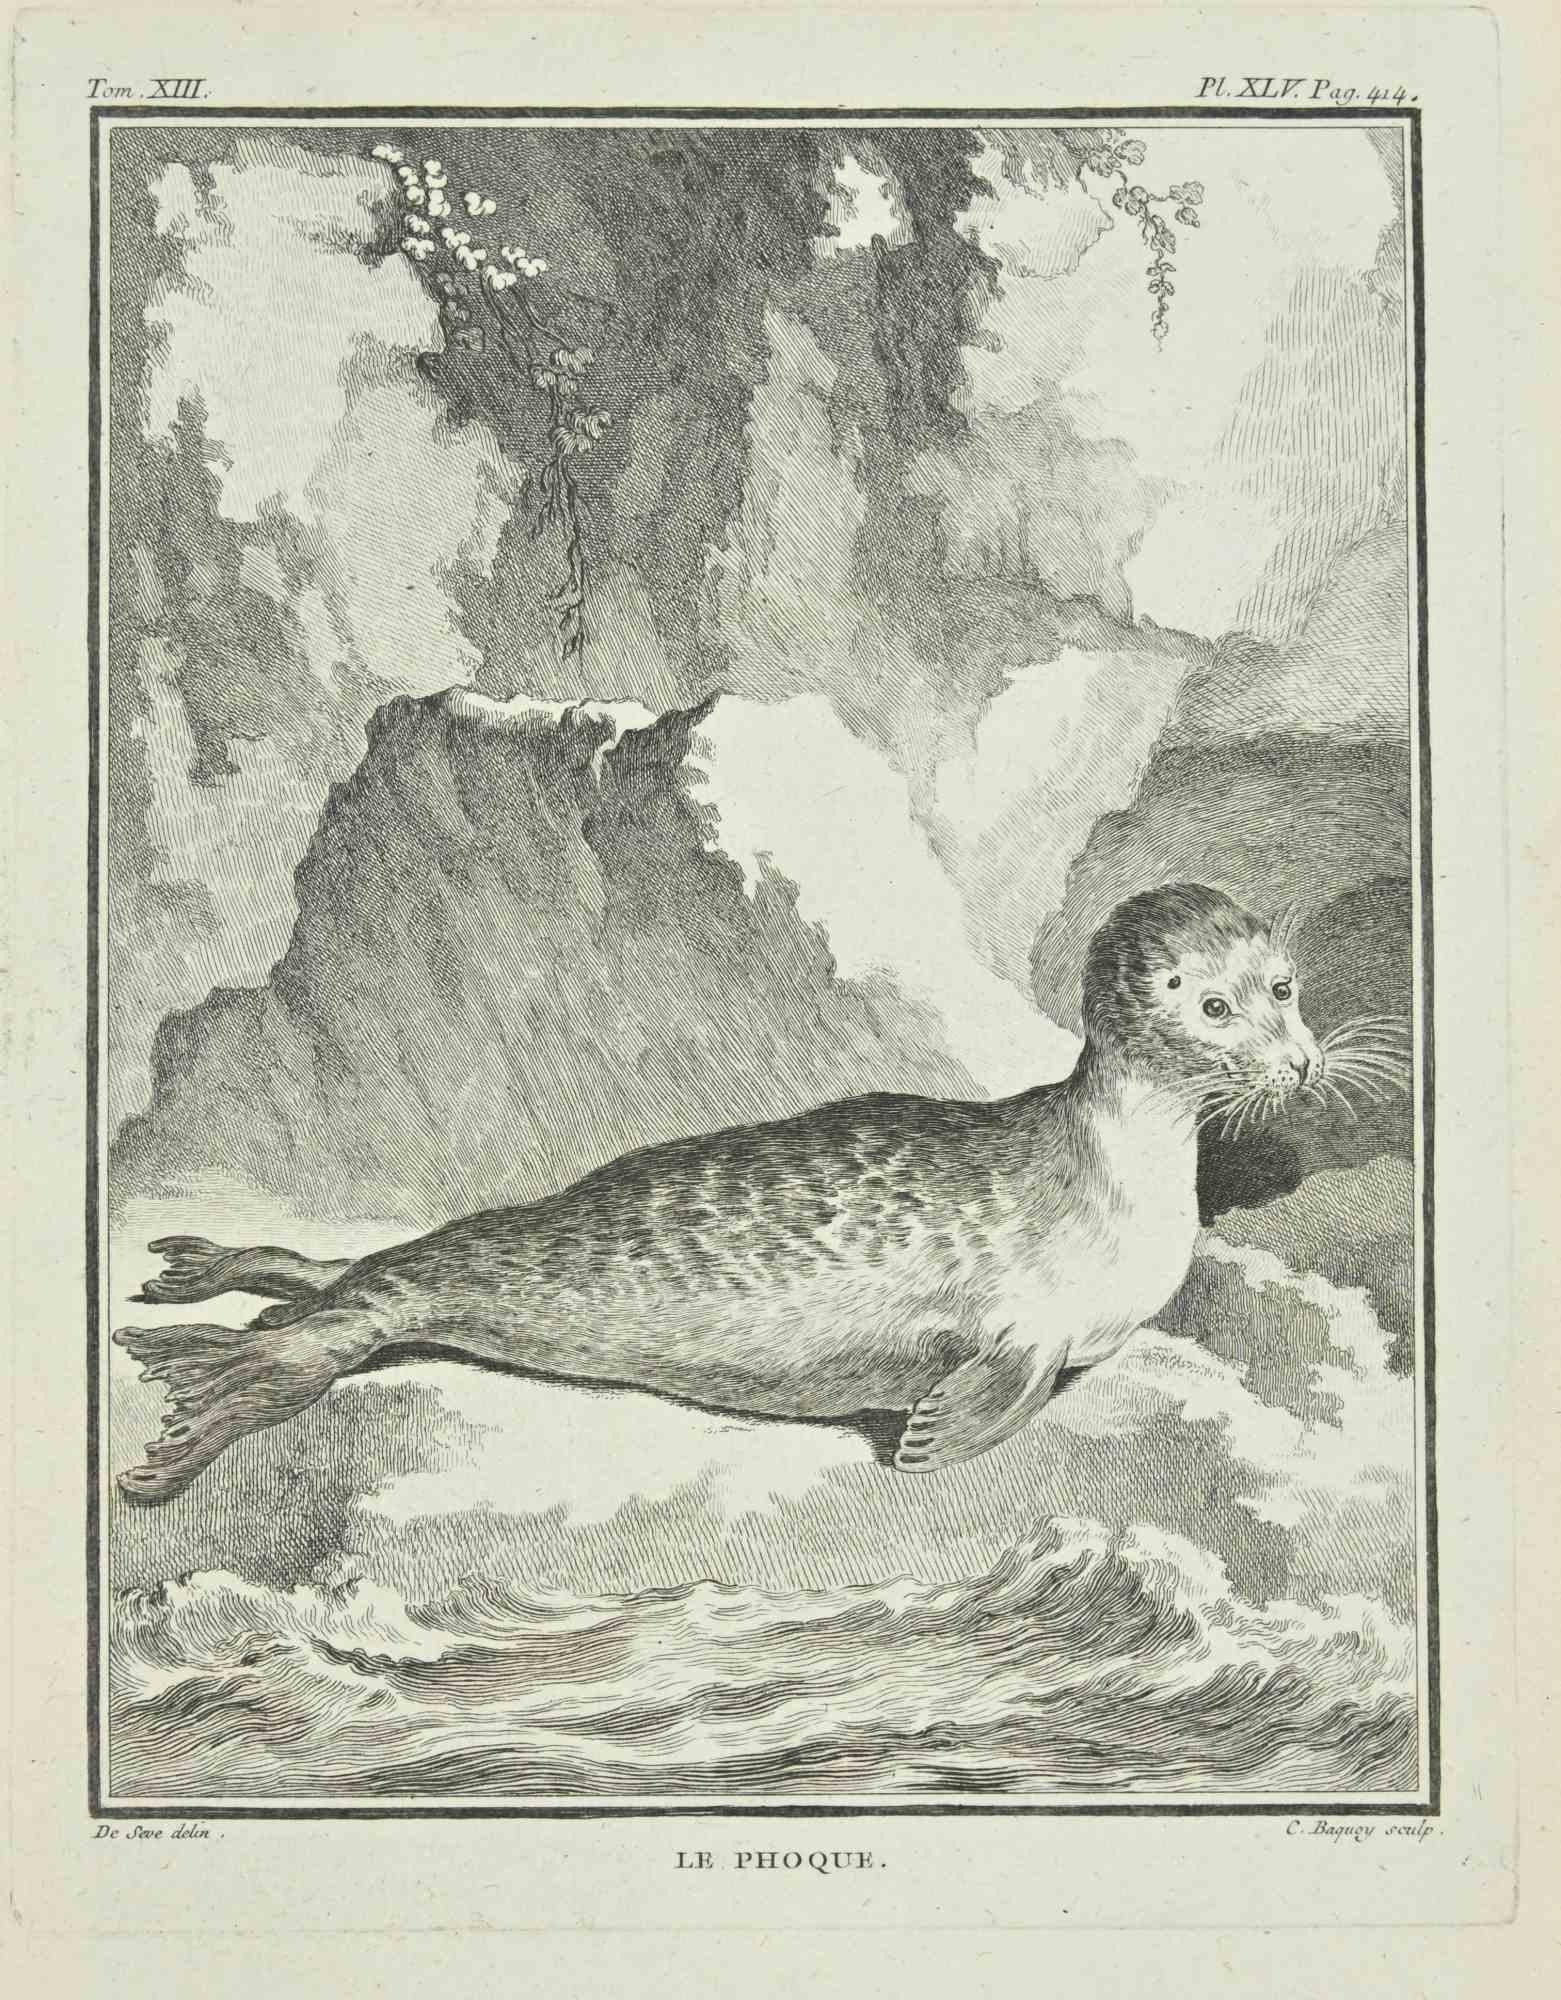 Le Phoque is an etching realized by Pierre Charles Baquoy in 1771.

It belongs to the suite "Histoire naturelle, générale et particulière avec la description du Cabinet du Roi".

 

Pierre Charles Baquoy (27 July 1759 – 4 February 1829) was a French